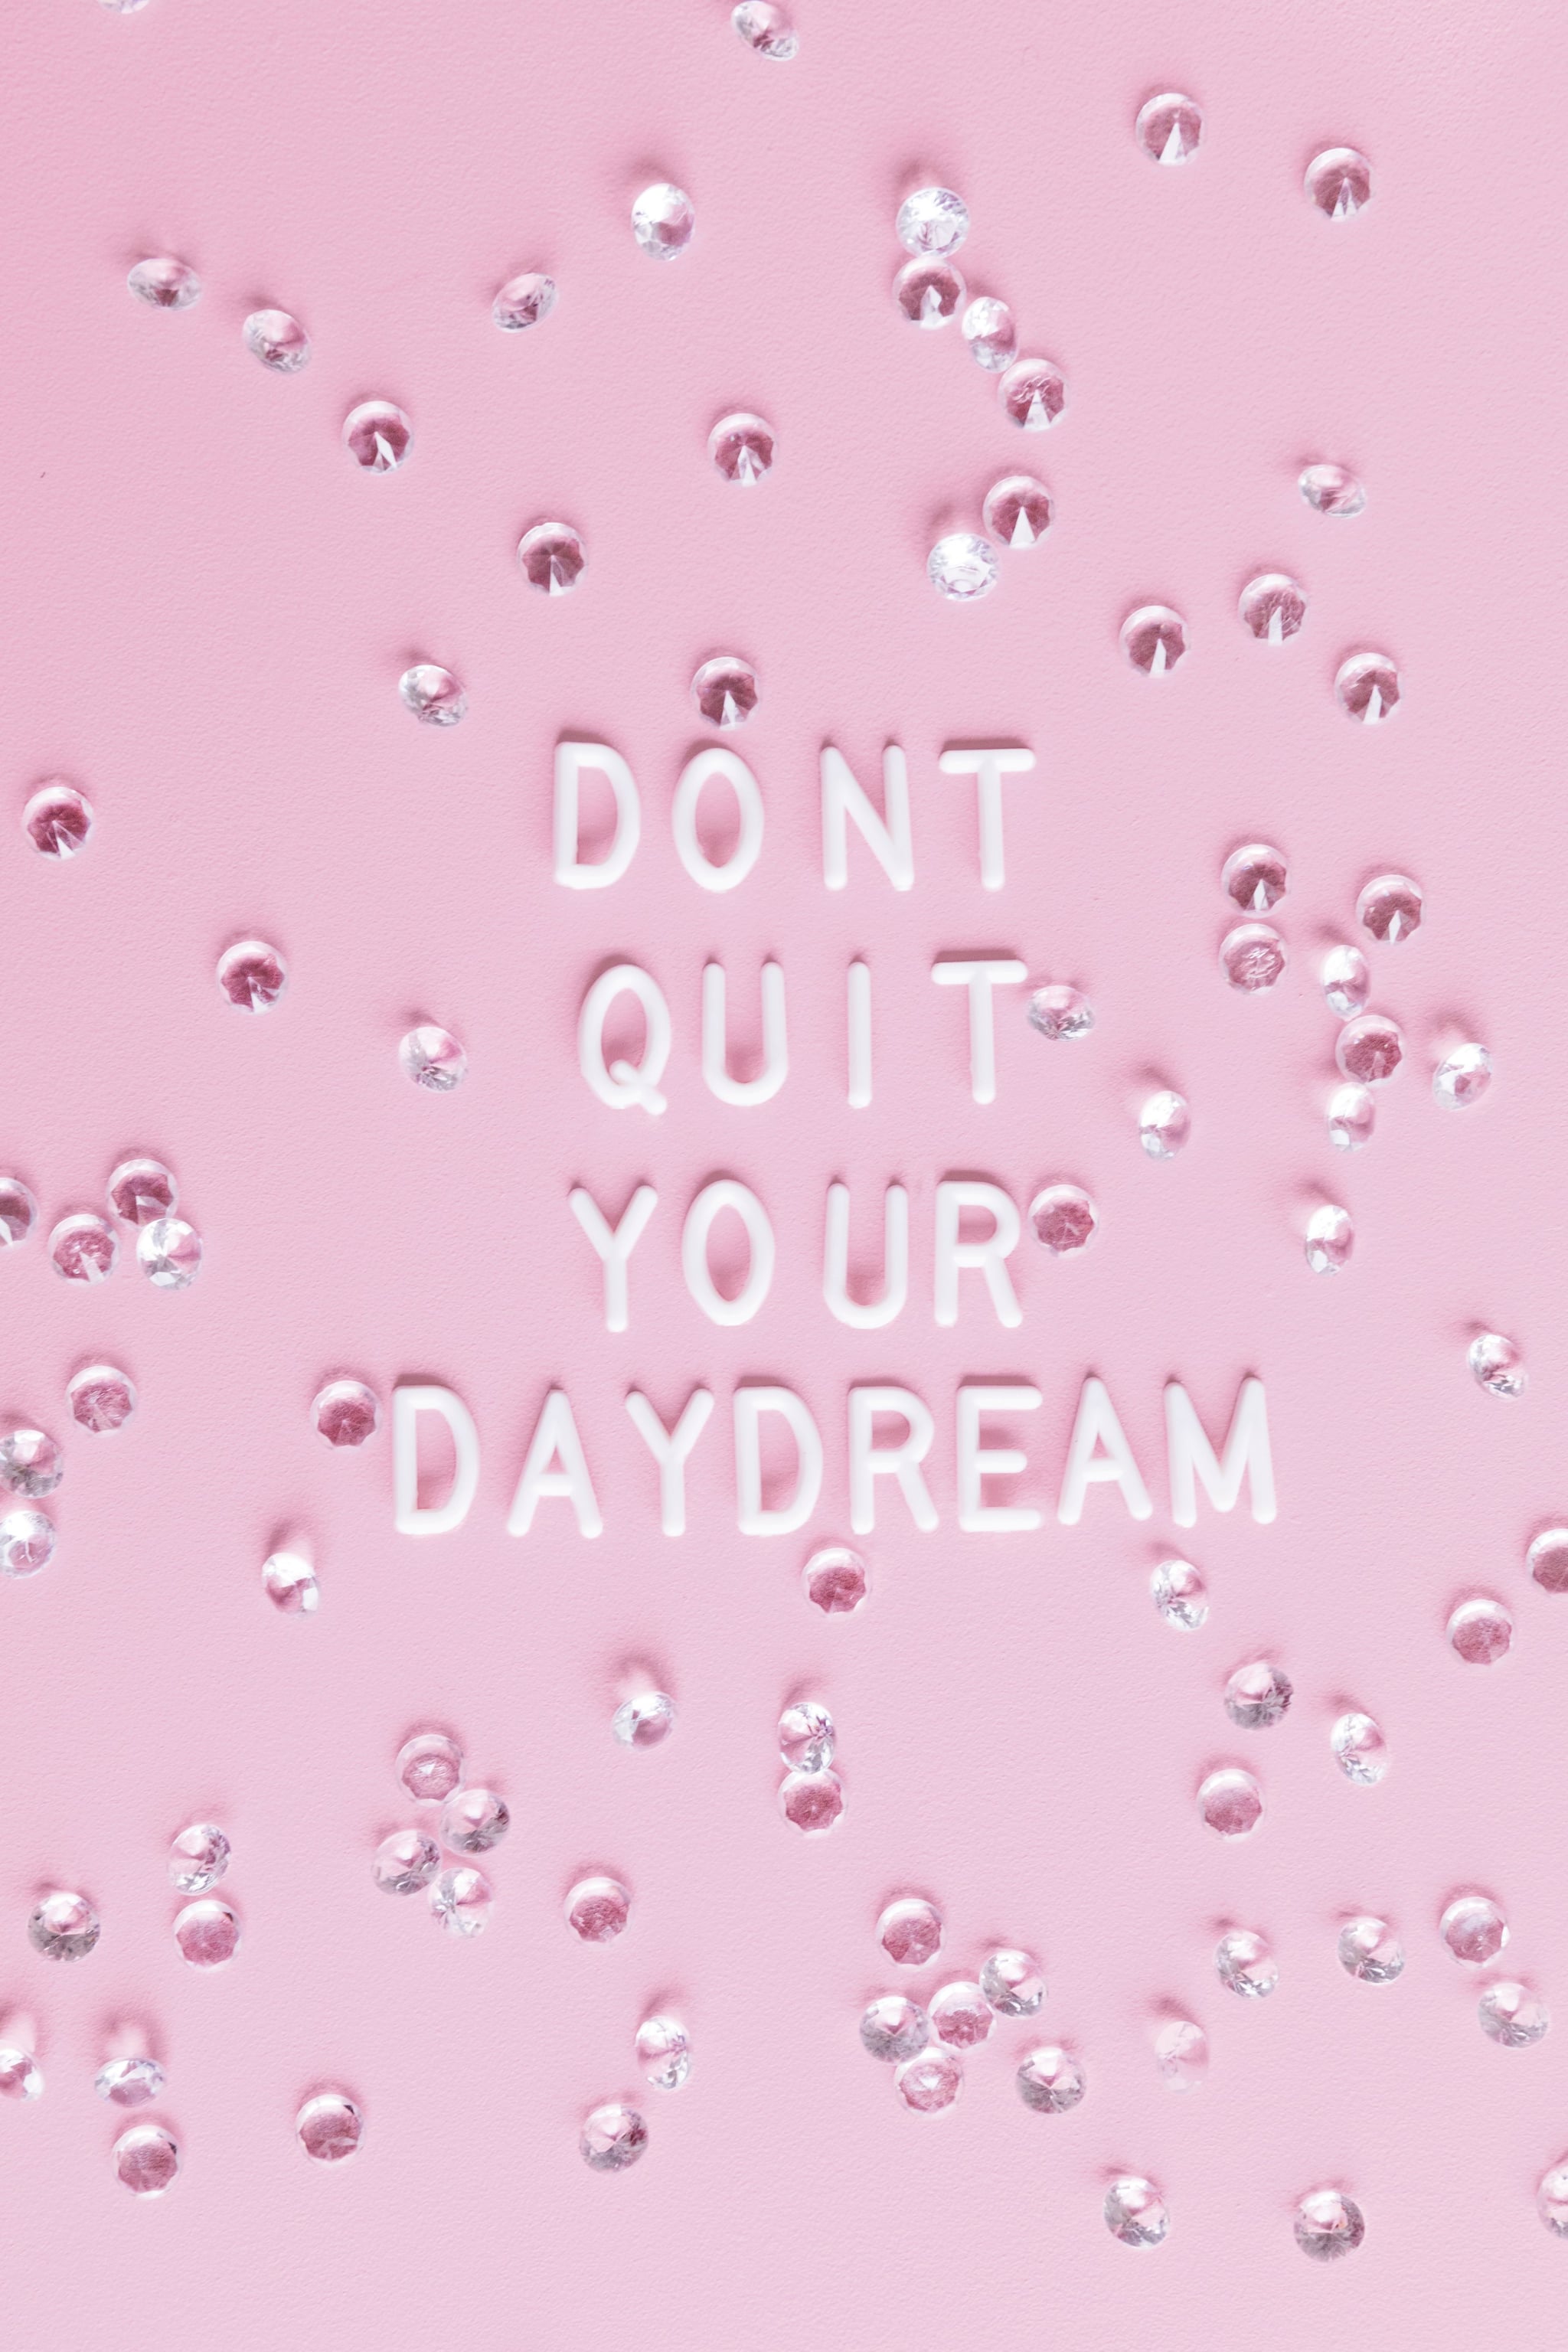 Inspirational Quotes That Make Perfect Phone Backgrounds Popsugar Tech